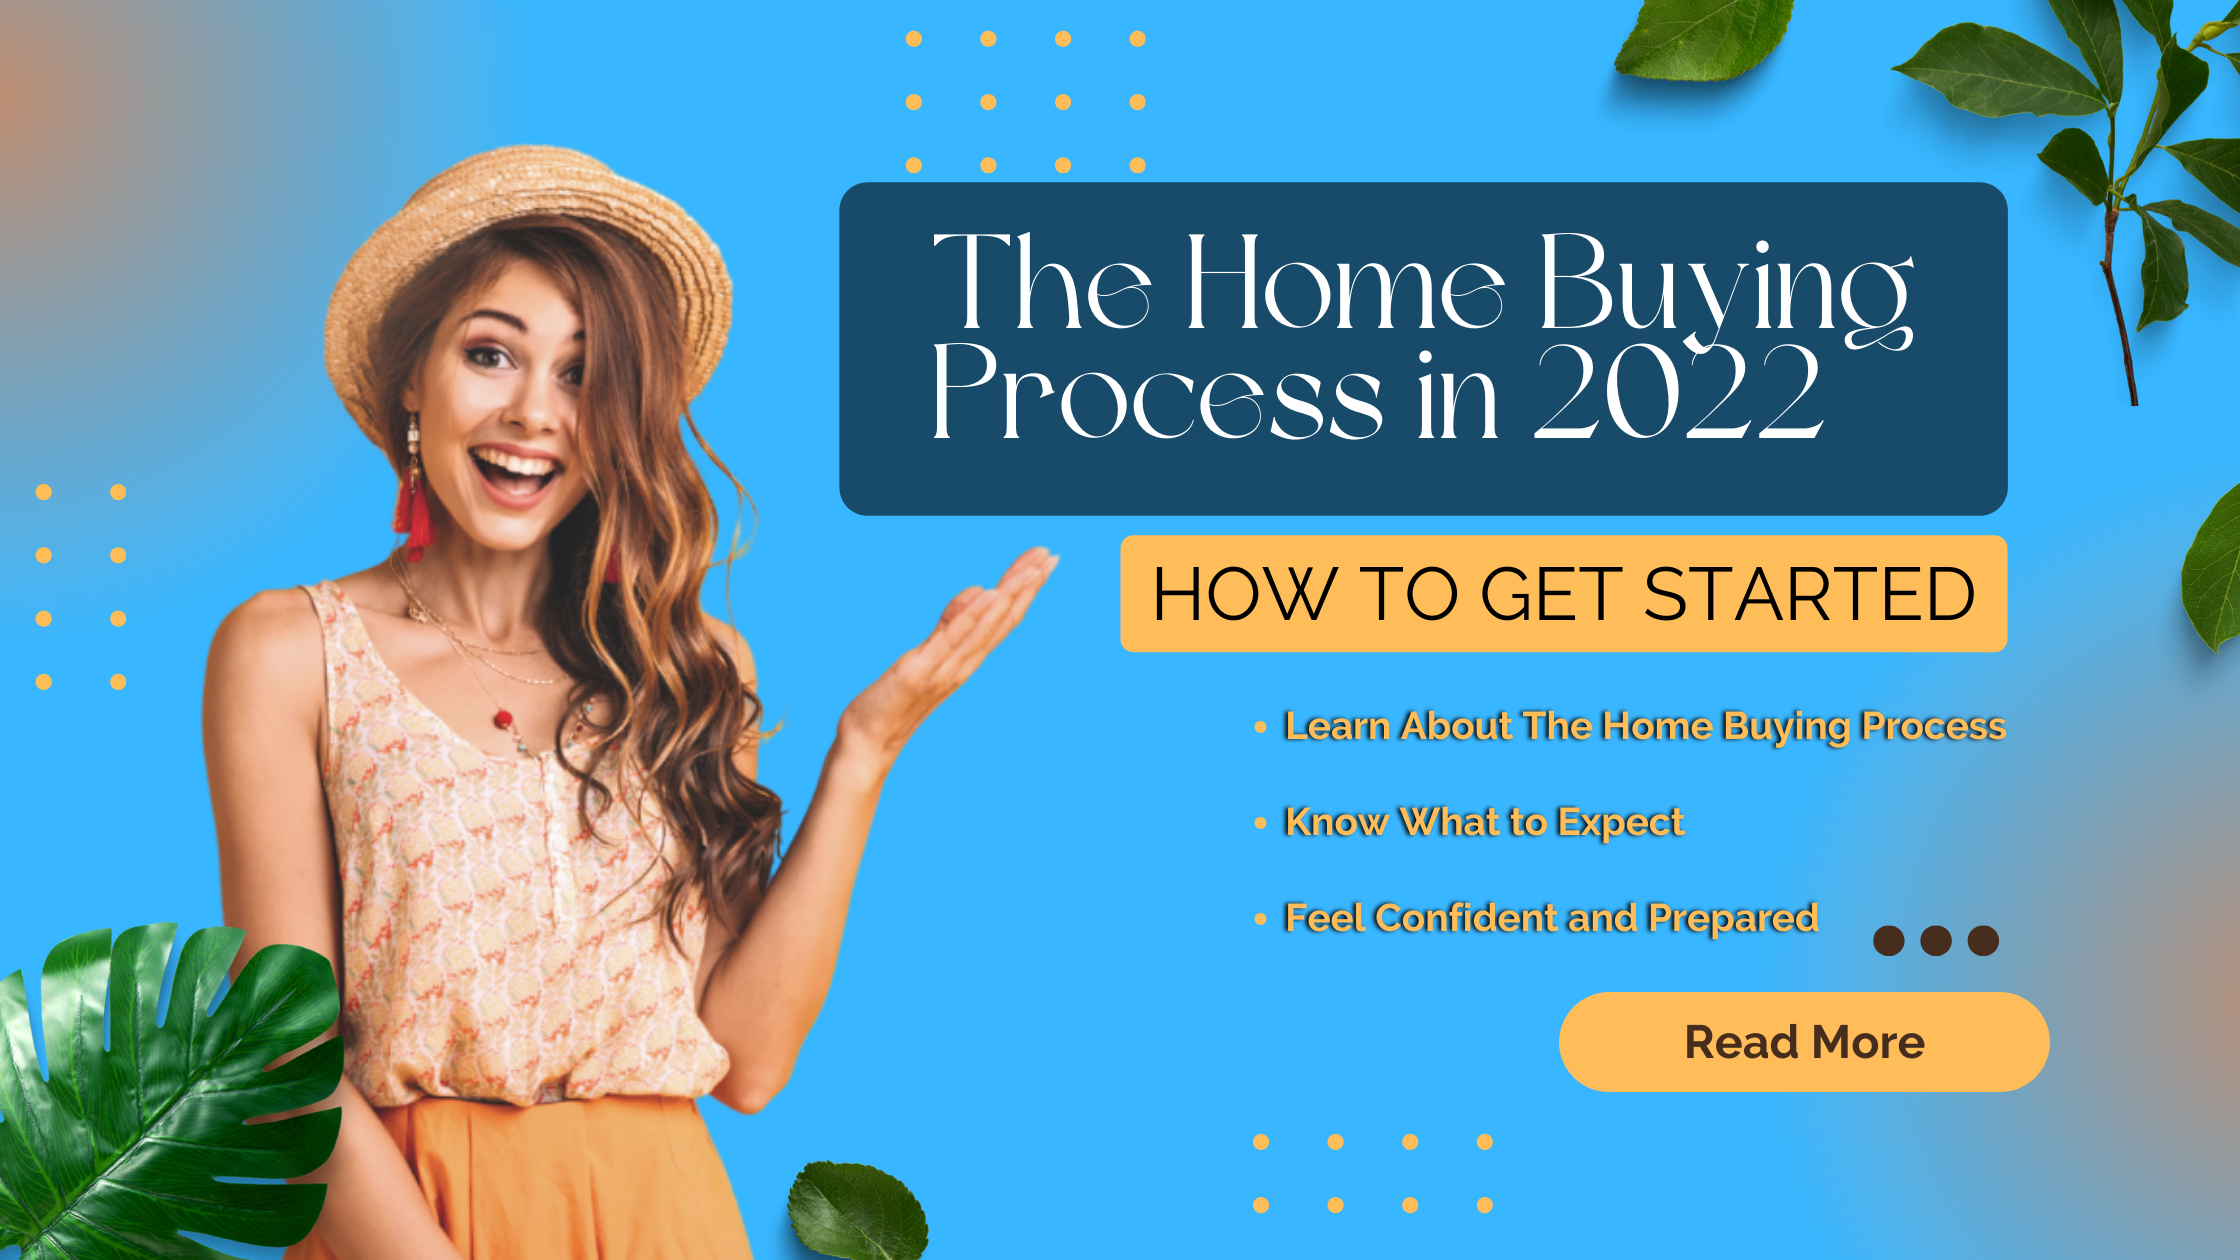 The Home Buying Process in 2022 Blog Post Banner